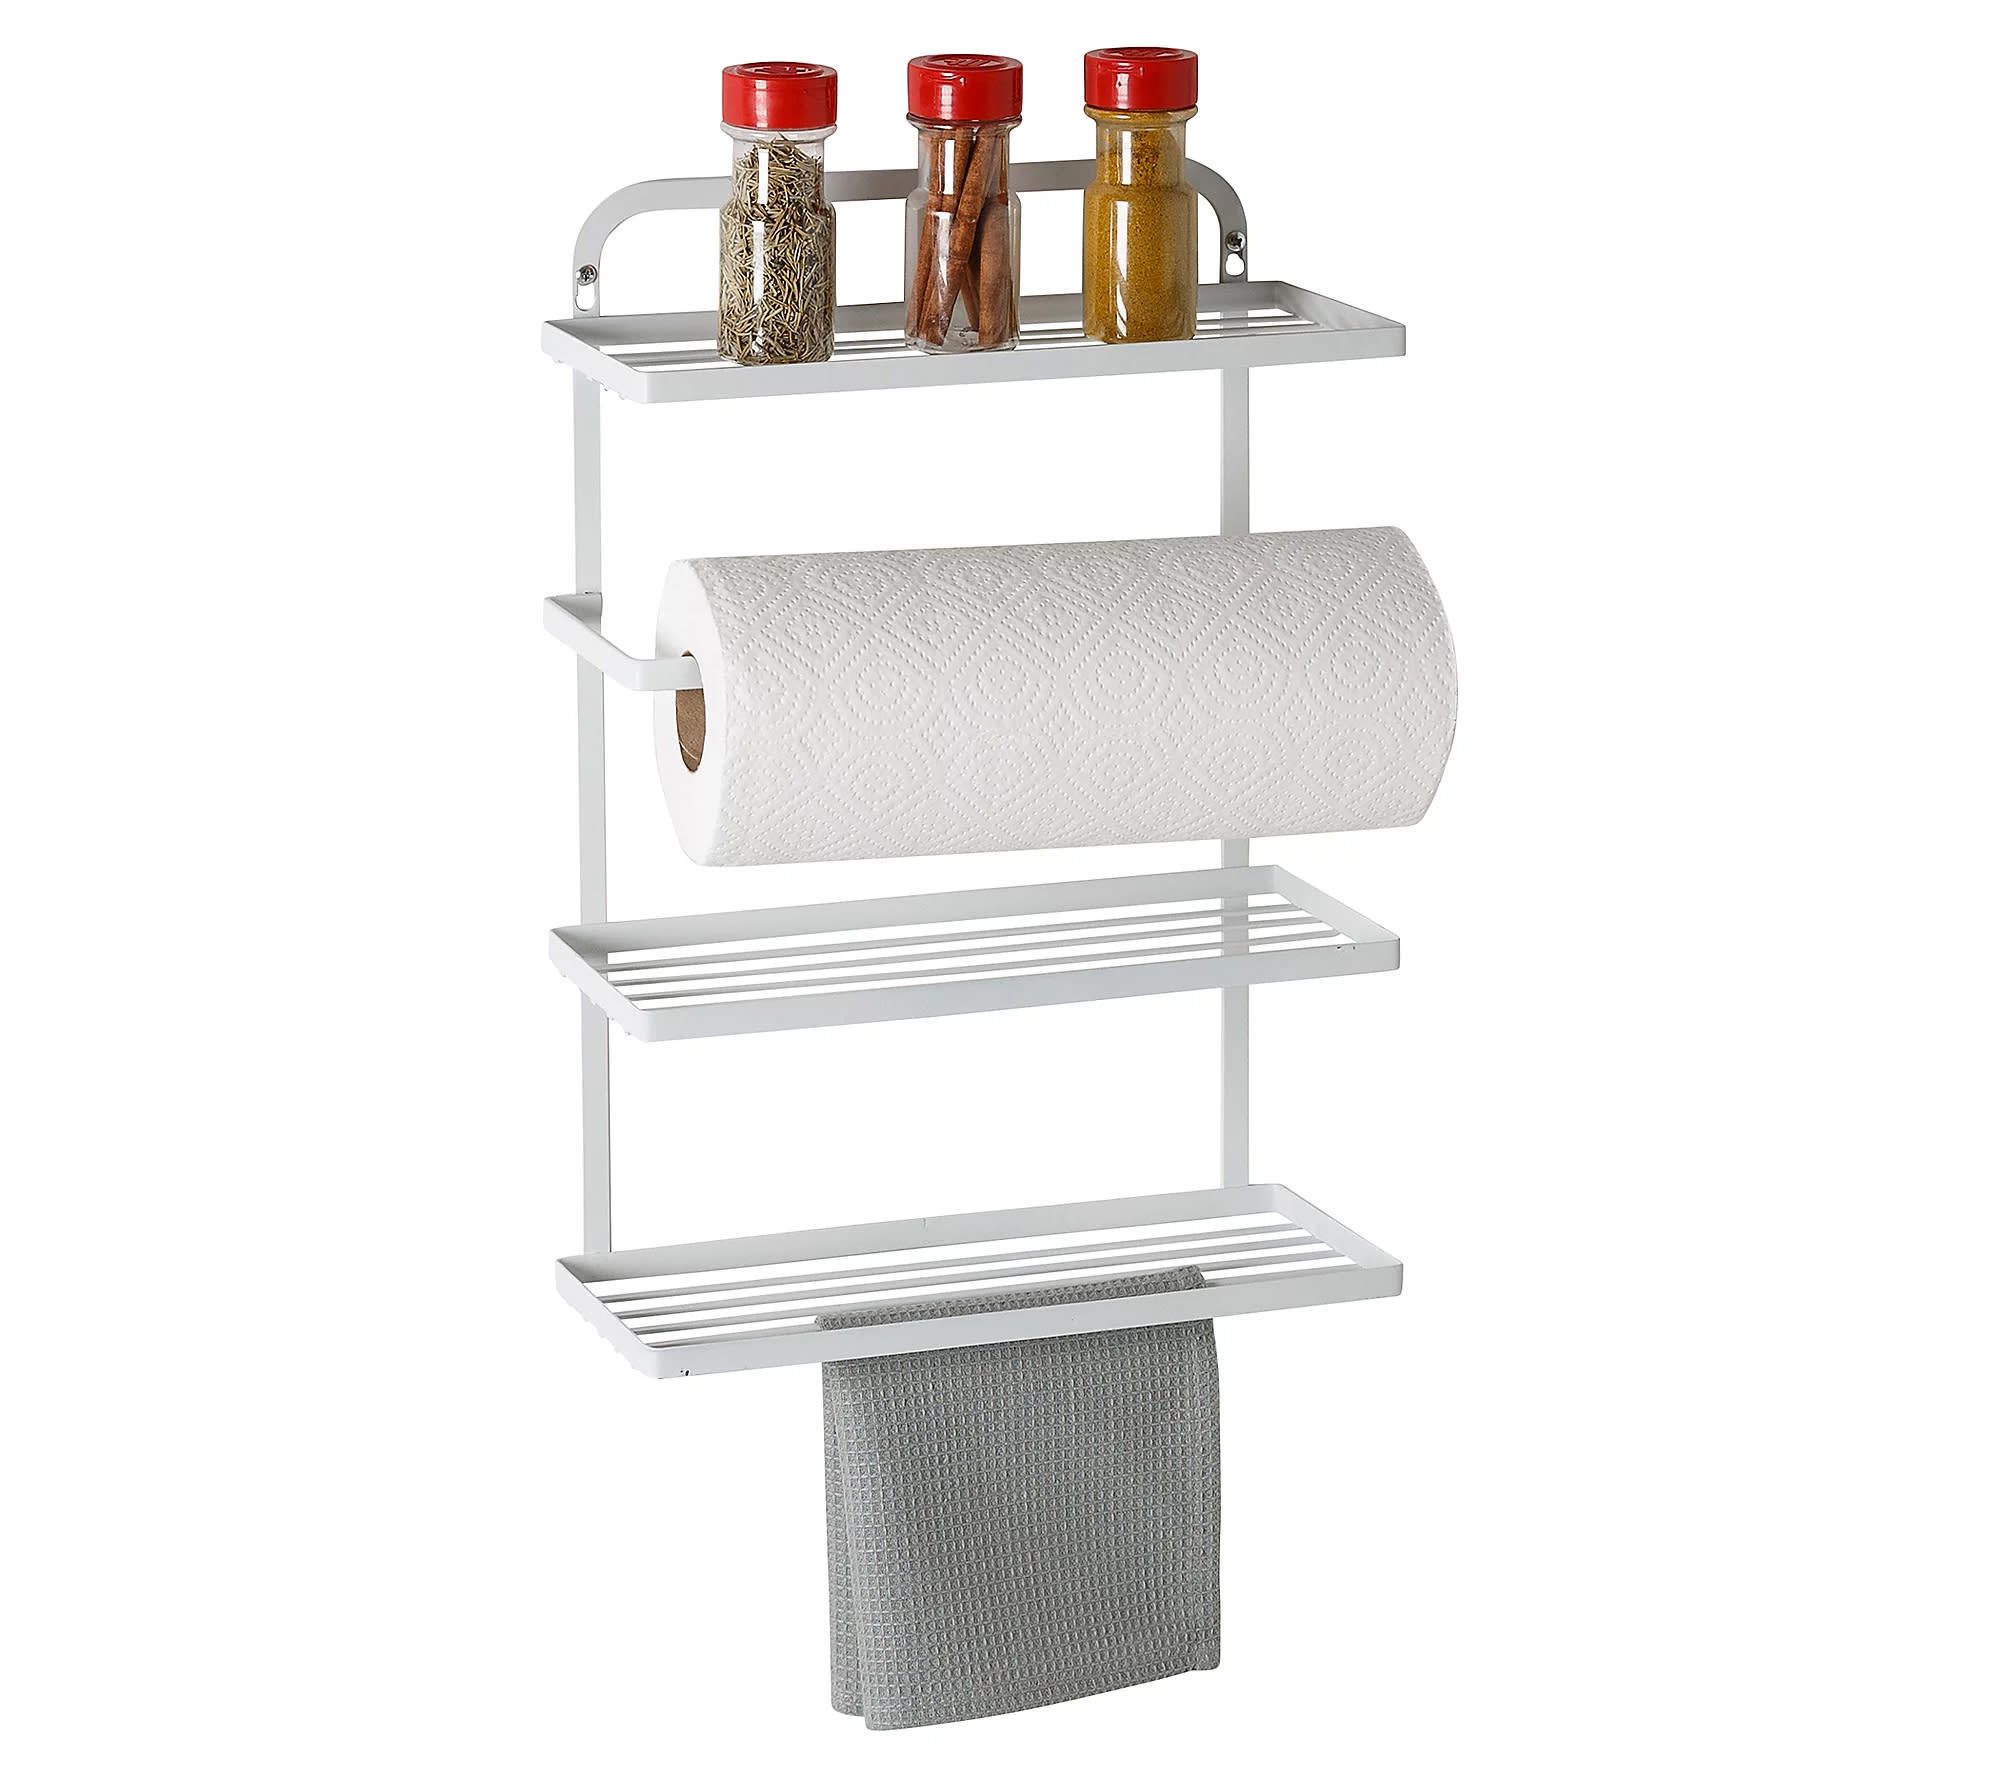 The Ingenious Paper Towel Holder That Takes Up Zero Space (It's Stylish,  Too!)